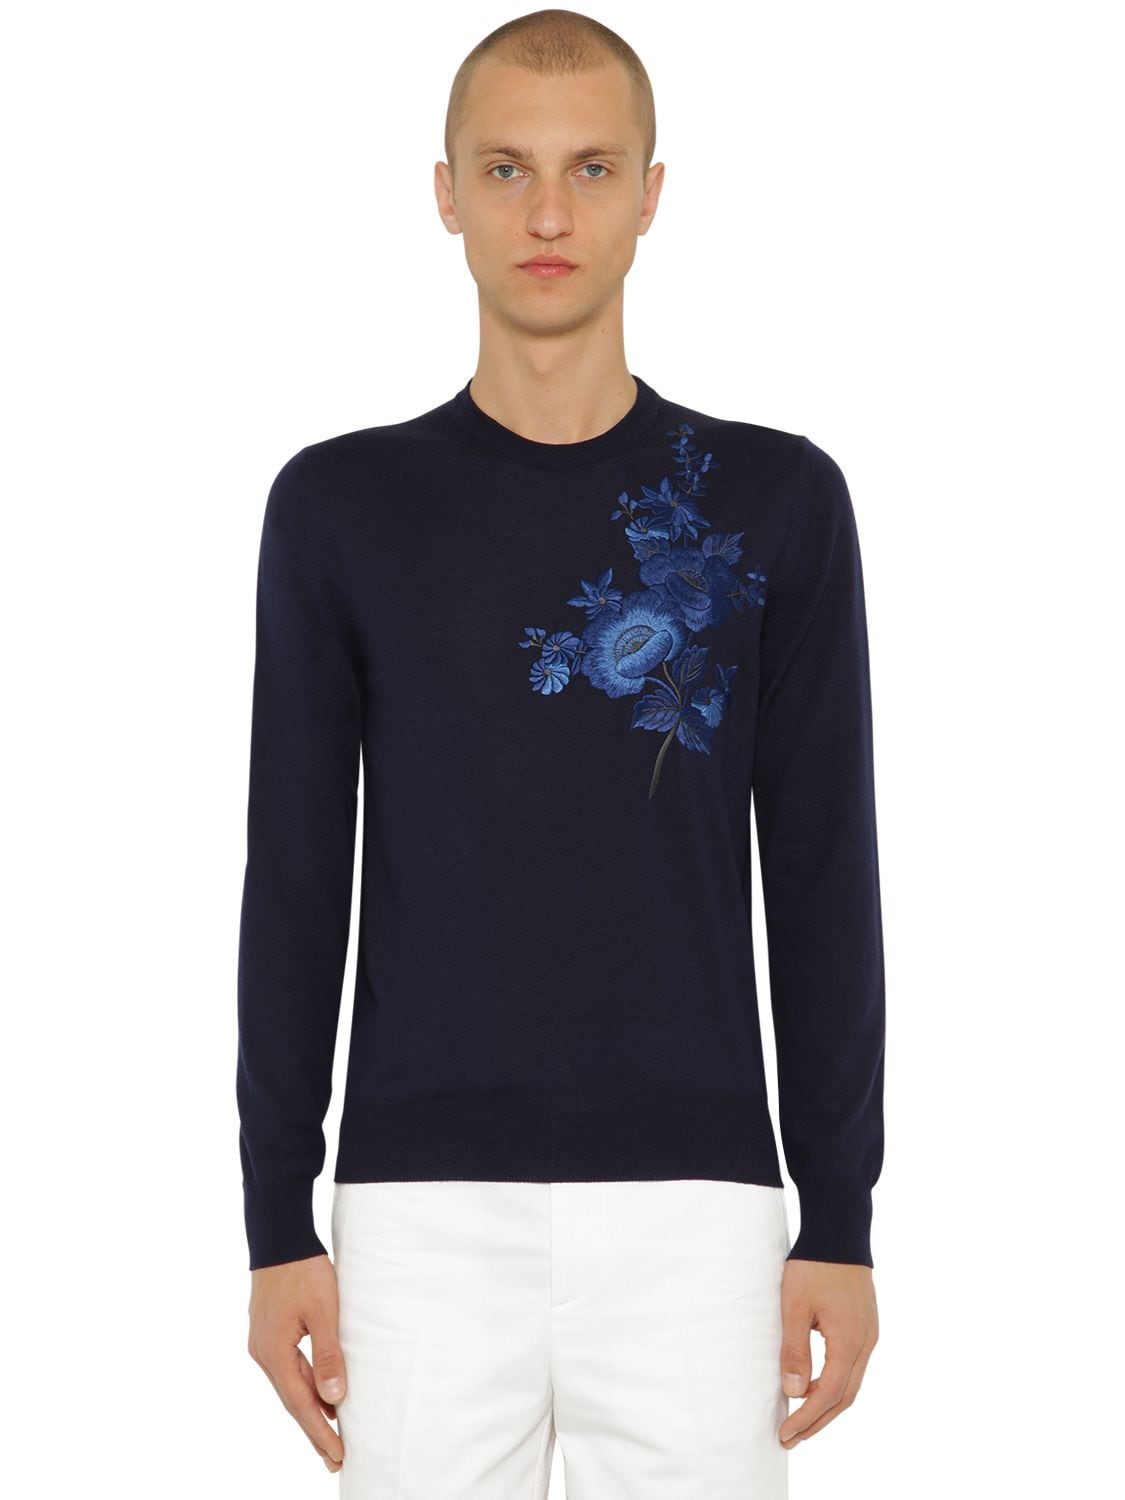 ALEXANDER MCQUEEN EMBROIDERED WOOL KNIT SWEATER,71IG06022-NDE2NG2